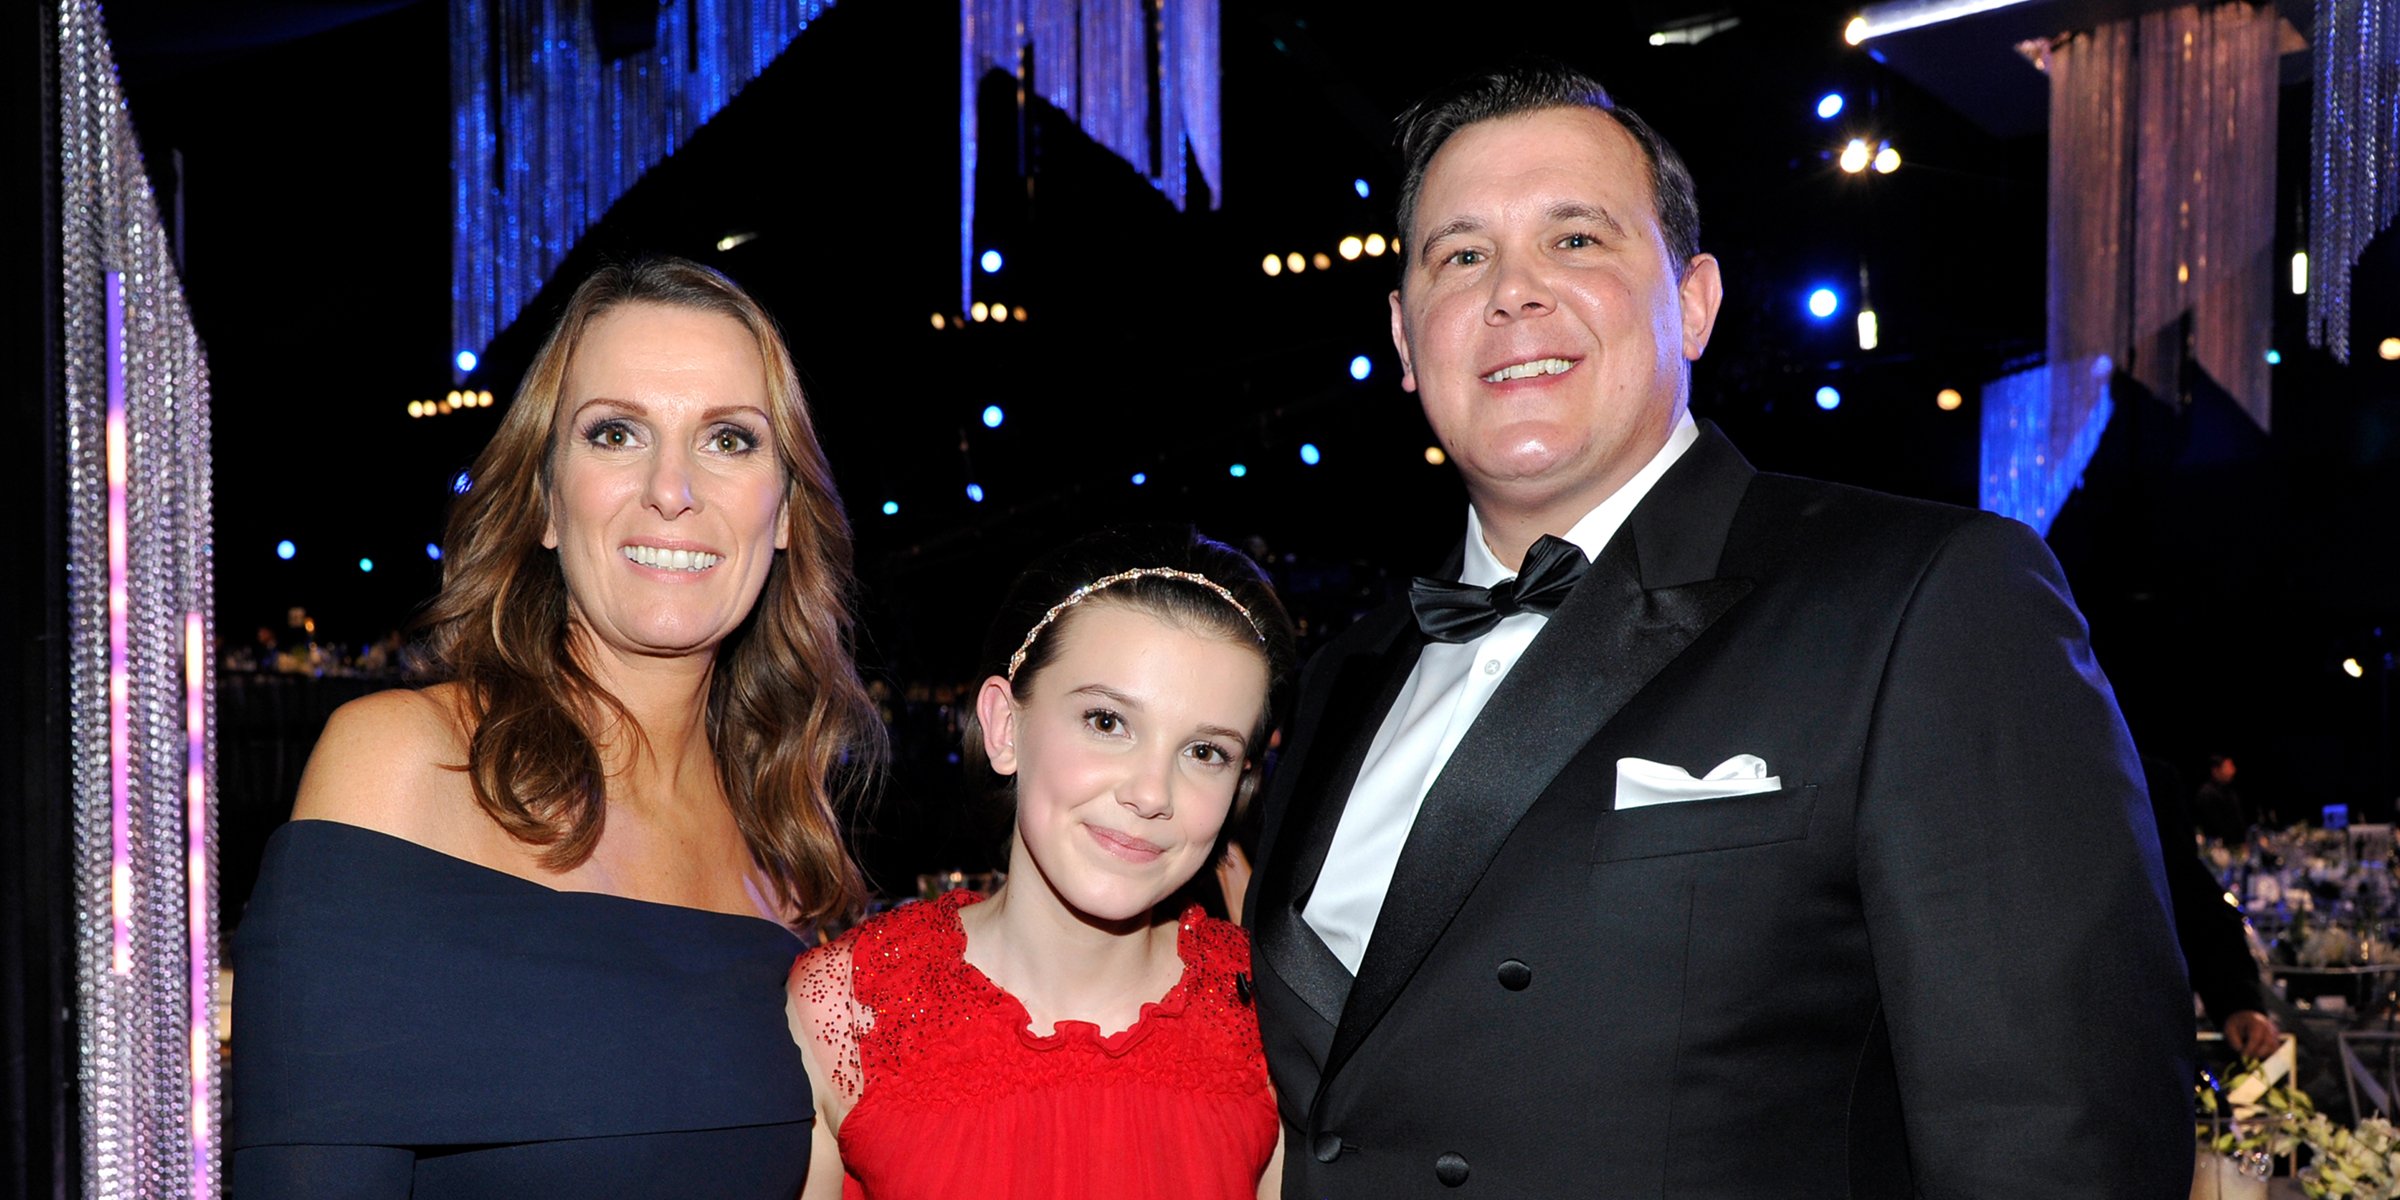 Kelly, Robert and Millie Brown | Source: Getty Images